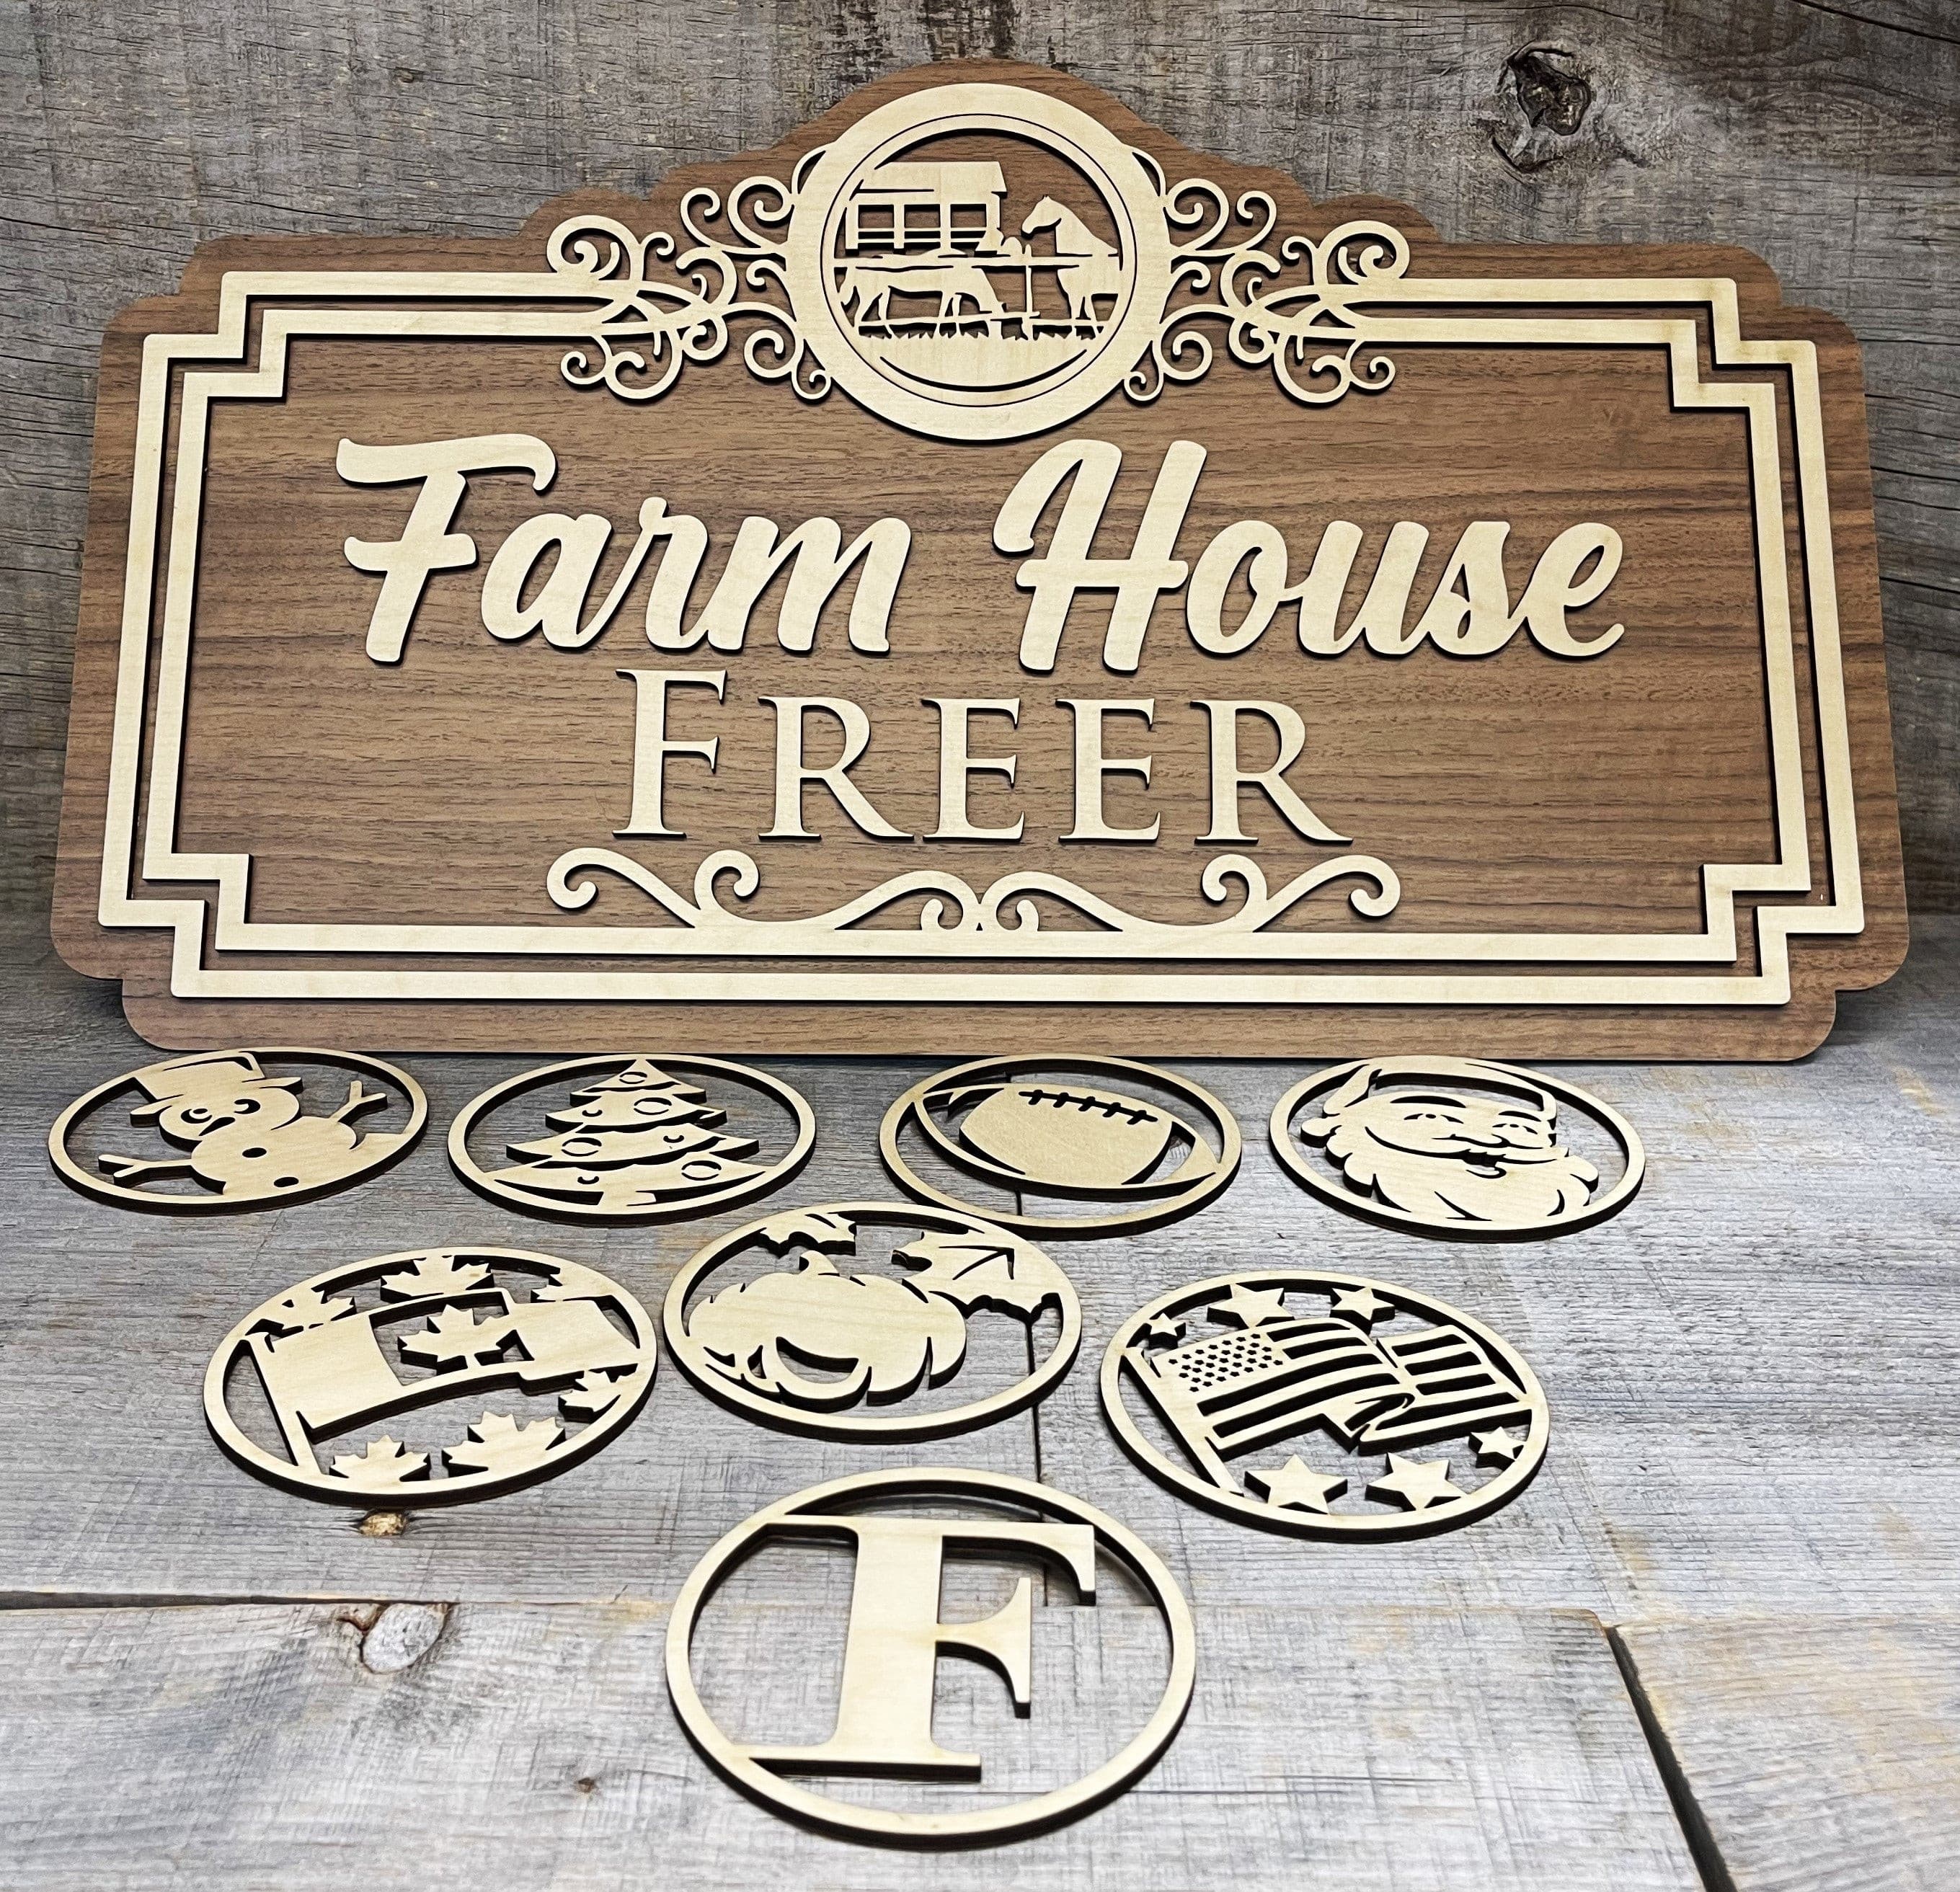 Personalized home décor sign with interchangeable icons.